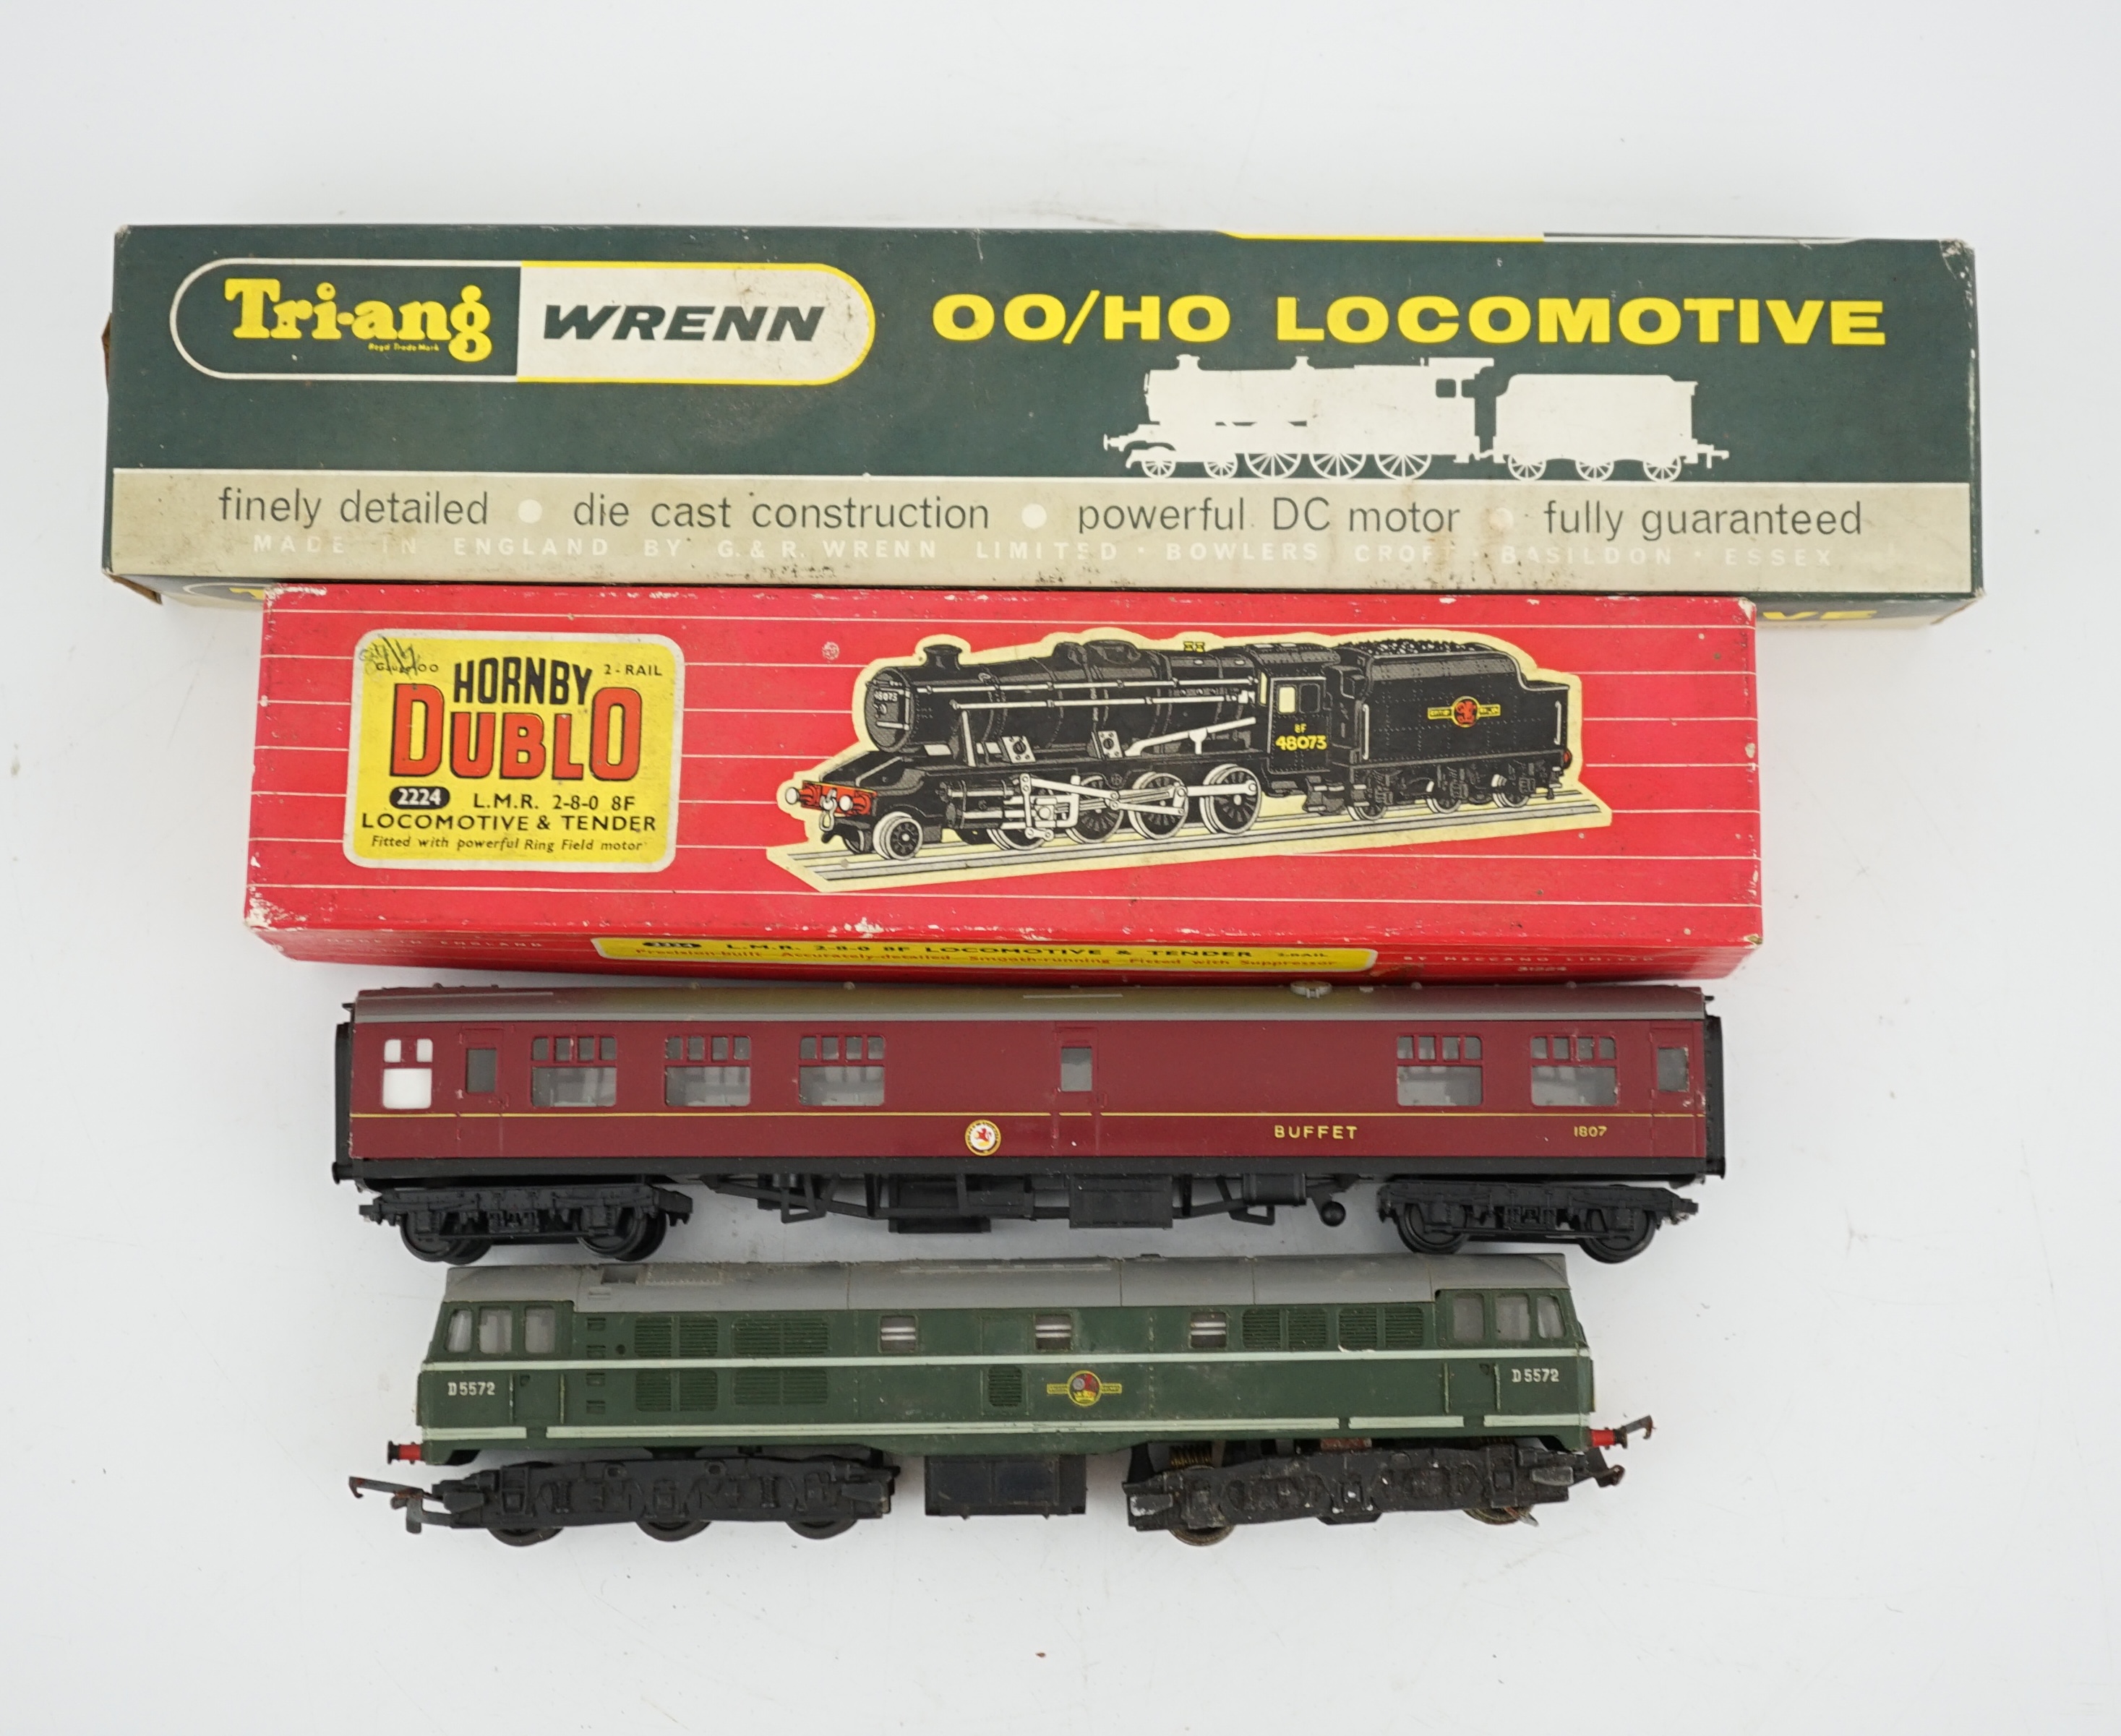 A collection of 00 gauge model railway by Hornby, Tri-ang, etc. including two boxed locomotives; a Tri-ang Wrenn LNER Class A4, Sir Nigel Gresley, (W2212), a Hornby Dublo BR Class 8F, 48073, (2224), plus an unboxed diese